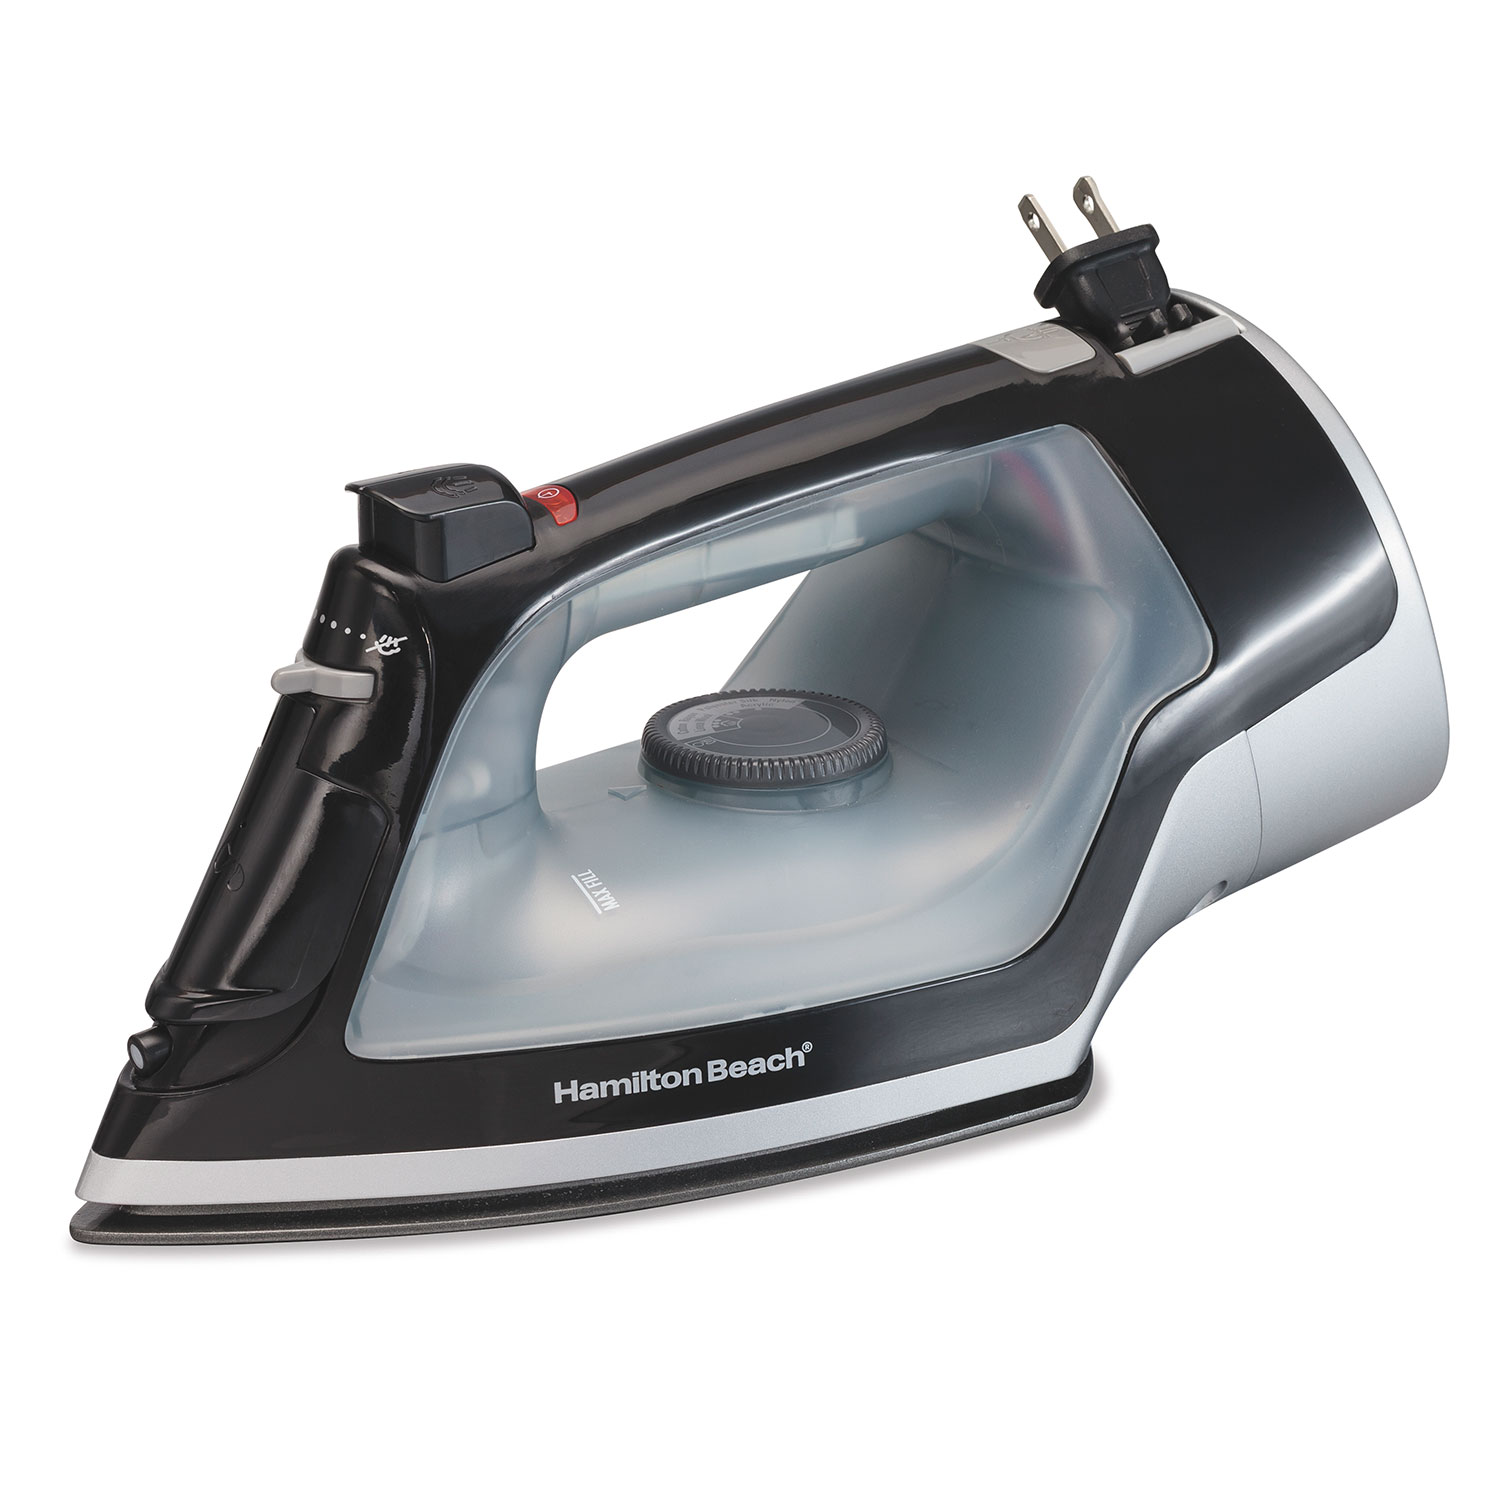 Full-Size Iron with Retractable Cord (14289)